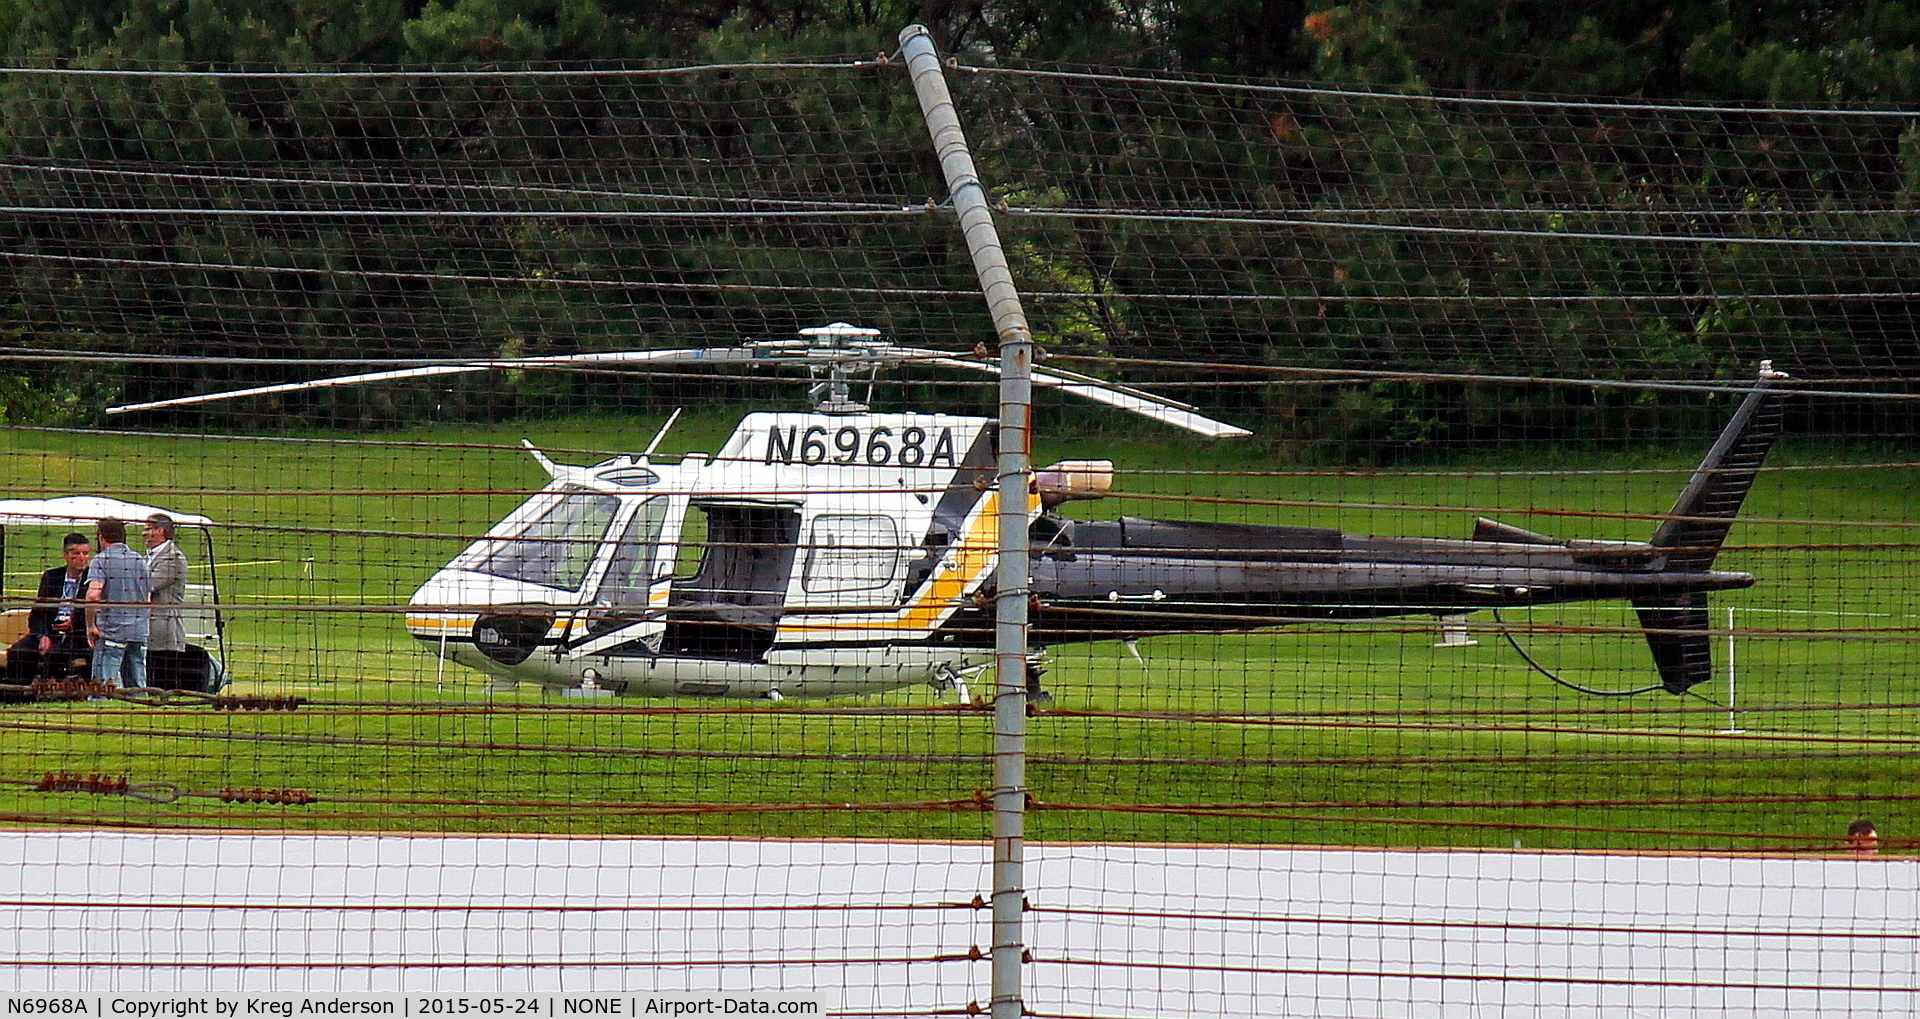 N6968A, 2013 Eurocopter AS-350B-3 Ecureuil Ecureuil C/N 7530, Eurocopter AS350 Astar on the infield at the Indianapolis Motor Speedway.